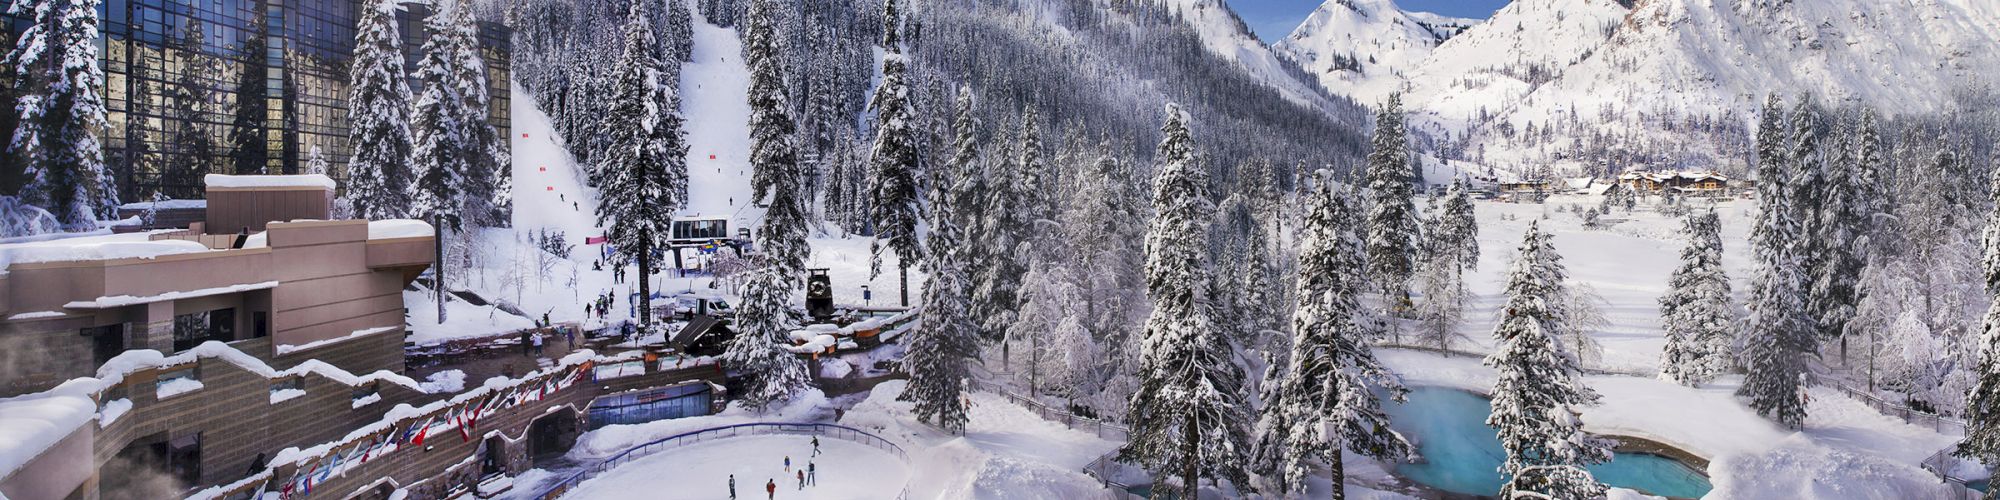 A snowy mountain resort with ski slopes, tall trees, buildings, and a blue sky with scattered clouds in the background, surrounded by snow-covered peaks.